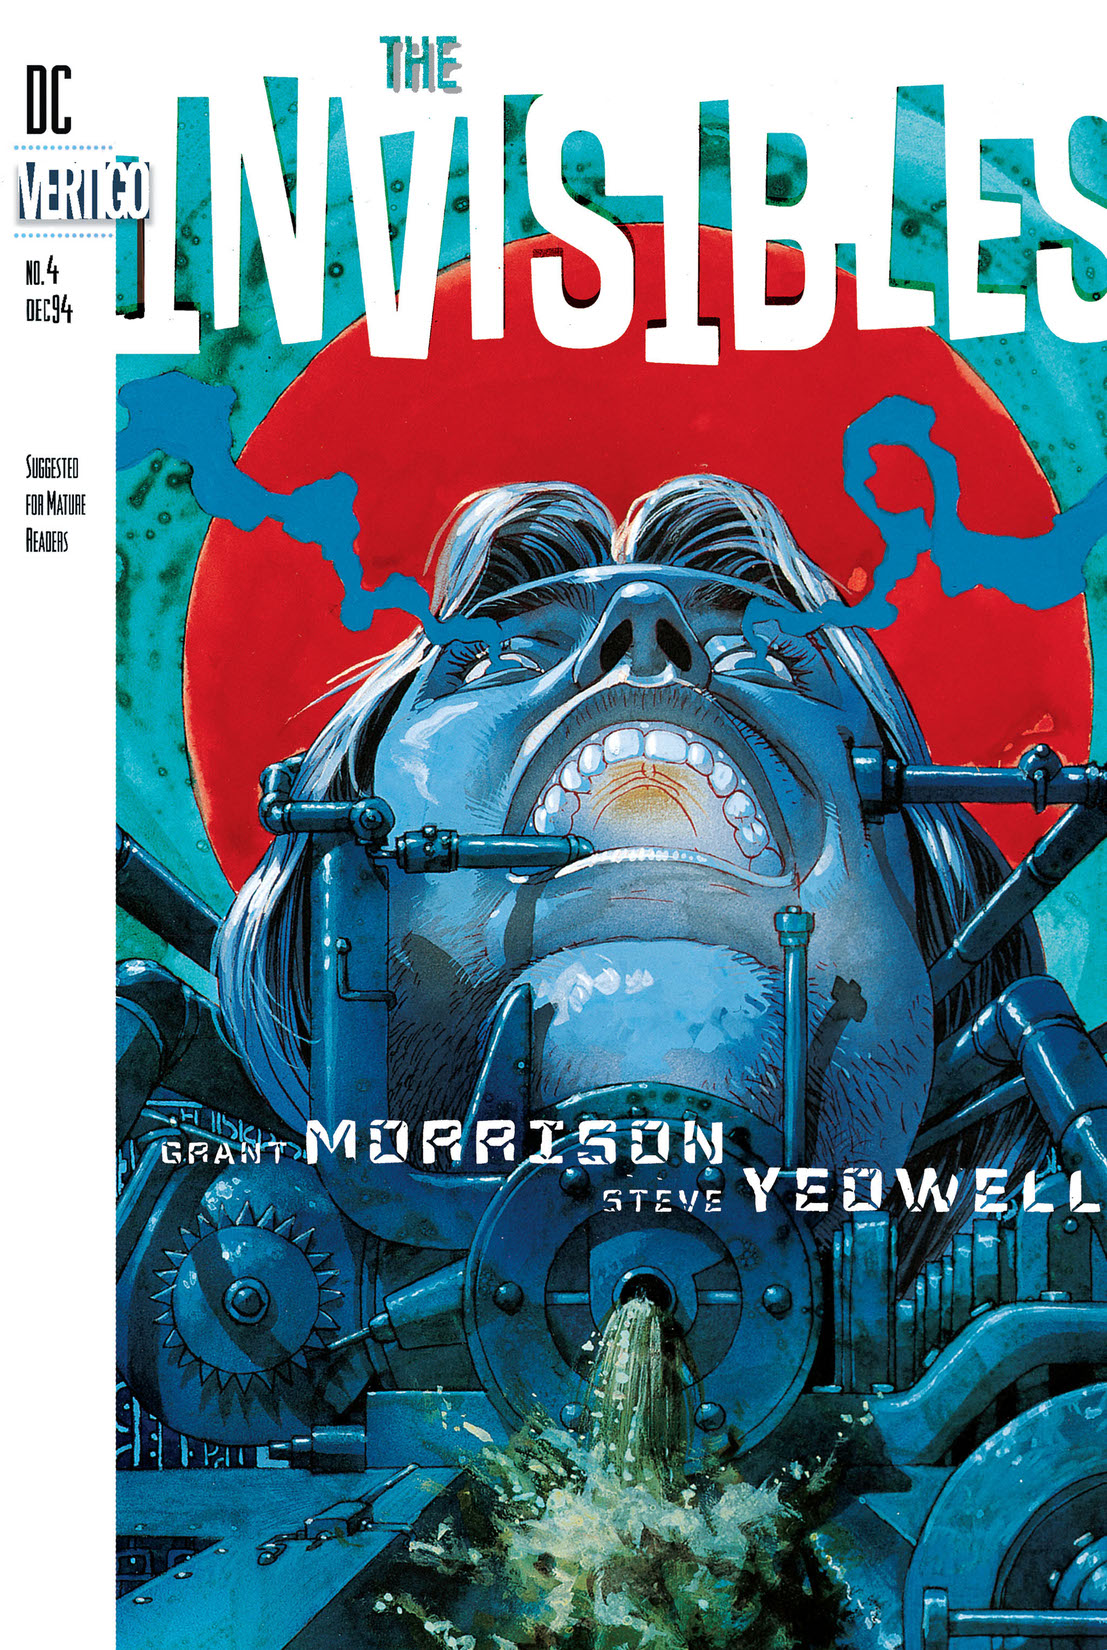 The Invisibles #4 preview images